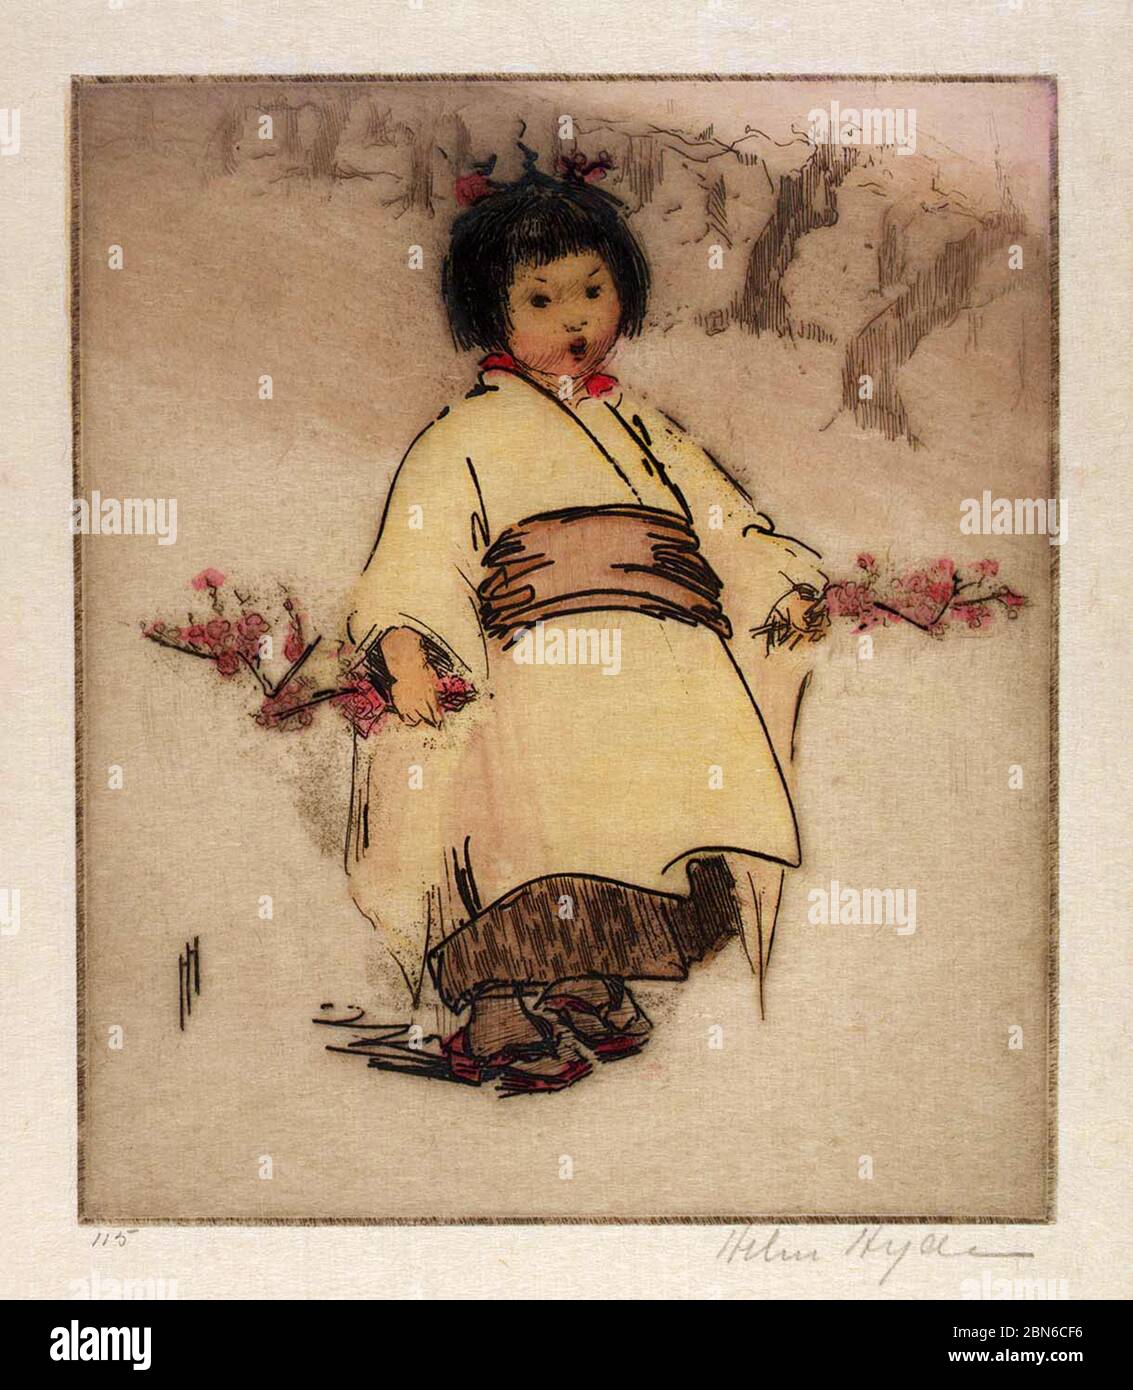 USA / Japan: 'Blossom Child'. Woodblock print by Helen Hyde (1868-1919), 1902.  Helen Hyde (April 6, 1868 - May 13, 1919) was an American engraver and Stock Photo